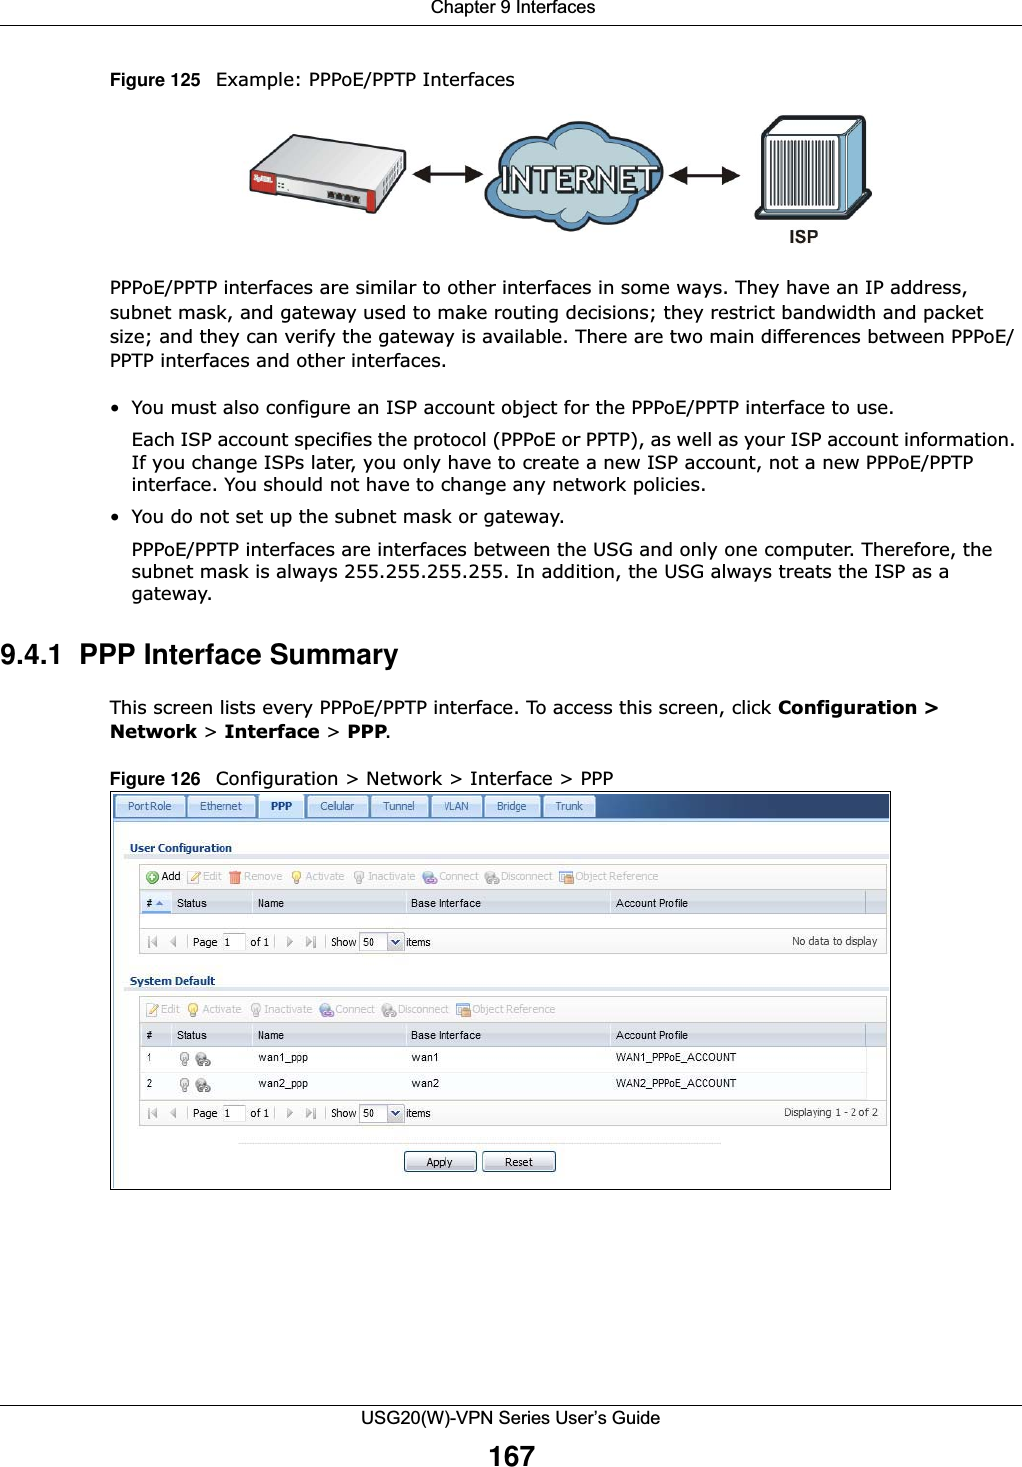  Chapter 9 InterfacesUSG20(W)-VPN Series User’s Guide167Figure 125   Example: PPPoE/PPTP InterfacesPPPoE/PPTP interfaces are similar to other interfaces in some ways. They have an IP address, subnet mask, and gateway used to make routing decisions; they restrict bandwidth and packet size; and they can verify the gateway is available. There are two main differences between PPPoE/PPTP interfaces and other interfaces.• You must also configure an ISP account object for the PPPoE/PPTP interface to use.Each ISP account specifies the protocol (PPPoE or PPTP), as well as your ISP account information. If you change ISPs later, you only have to create a new ISP account, not a new PPPoE/PPTP interface. You should not have to change any network policies.• You do not set up the subnet mask or gateway.PPPoE/PPTP interfaces are interfaces between the USG and only one computer. Therefore, the subnet mask is always 255.255.255.255. In addition, the USG always treats the ISP as a gateway.9.4.1  PPP Interface SummaryThis screen lists every PPPoE/PPTP interface. To access this screen, click Configuration &gt; Network &gt; Interface &gt; PPP.Figure 126   Configuration &gt; Network &gt; Interface &gt; PPP 